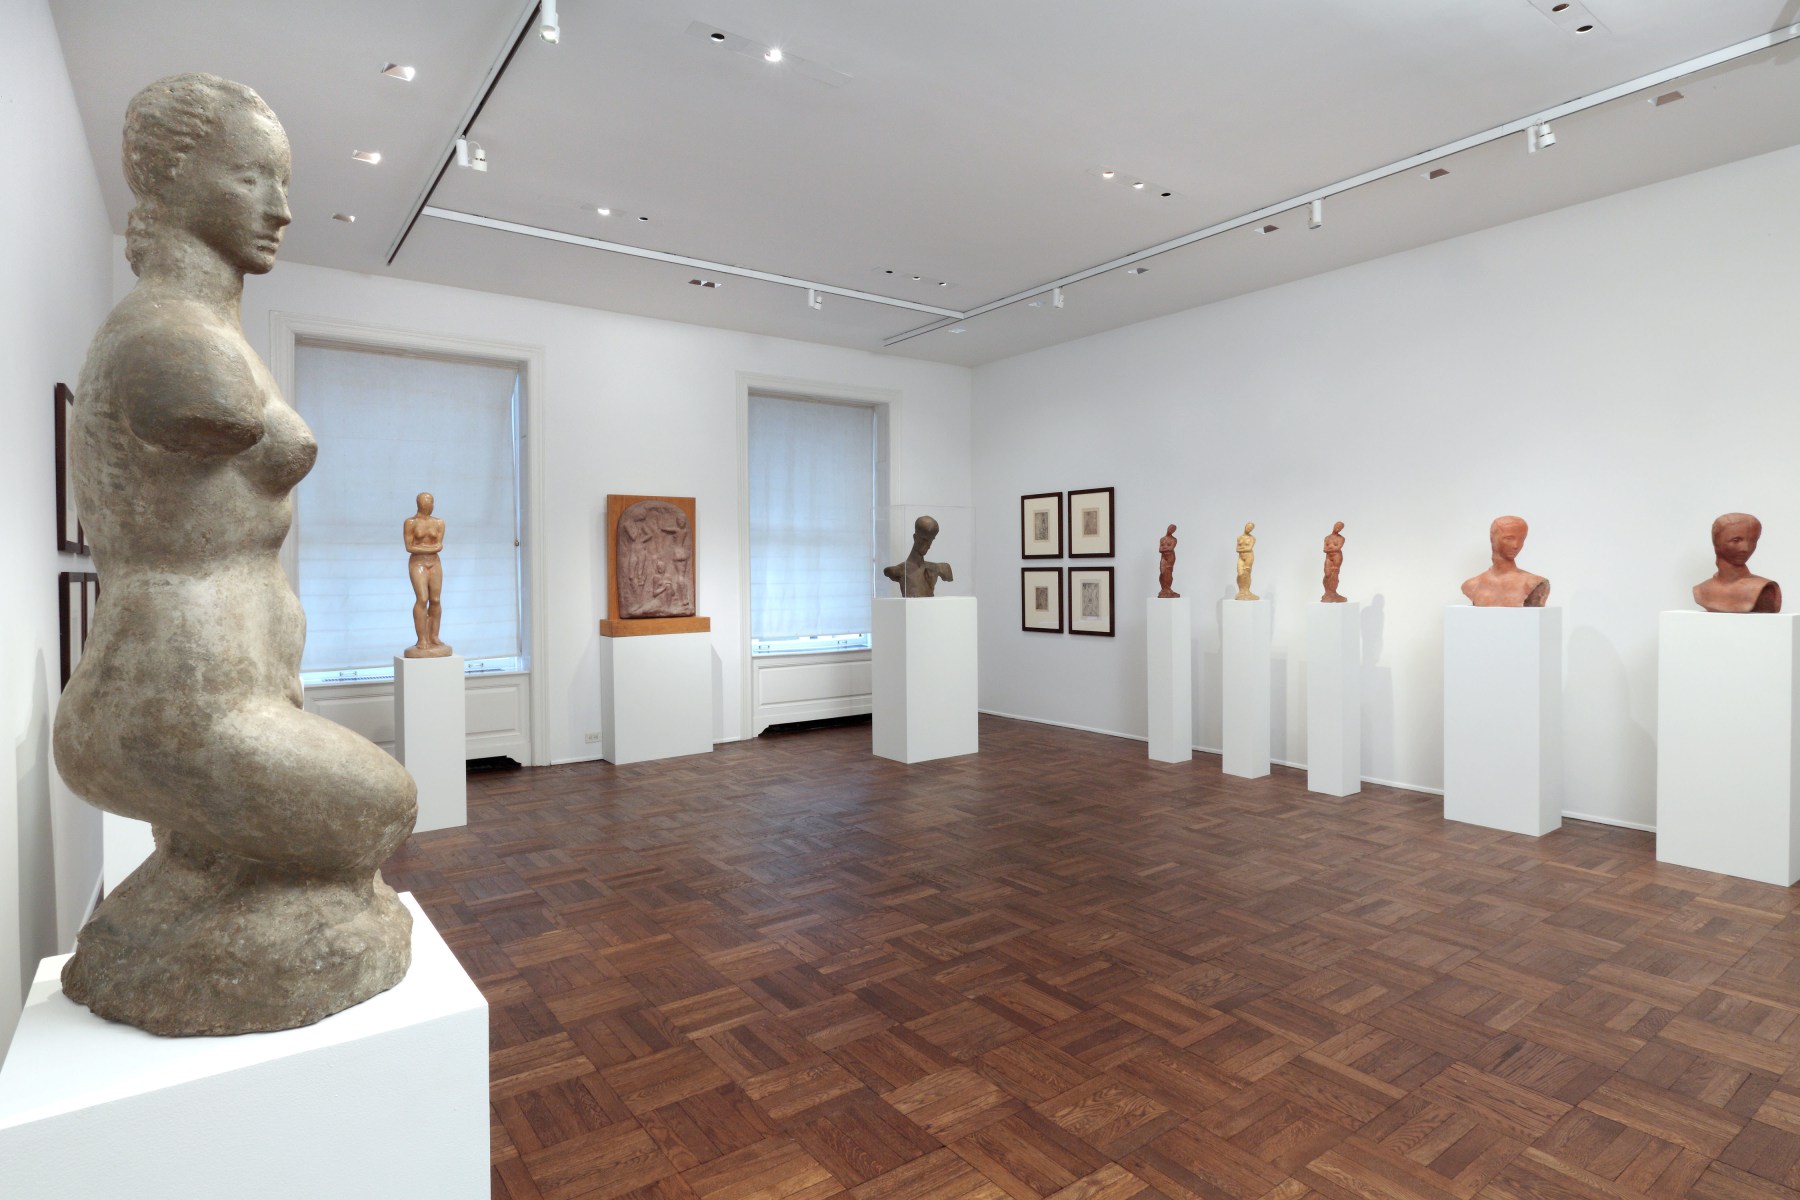 WILHELM LEHMBRUCK, Sculptures and Etchings, New York, 2012, Installation Image 4